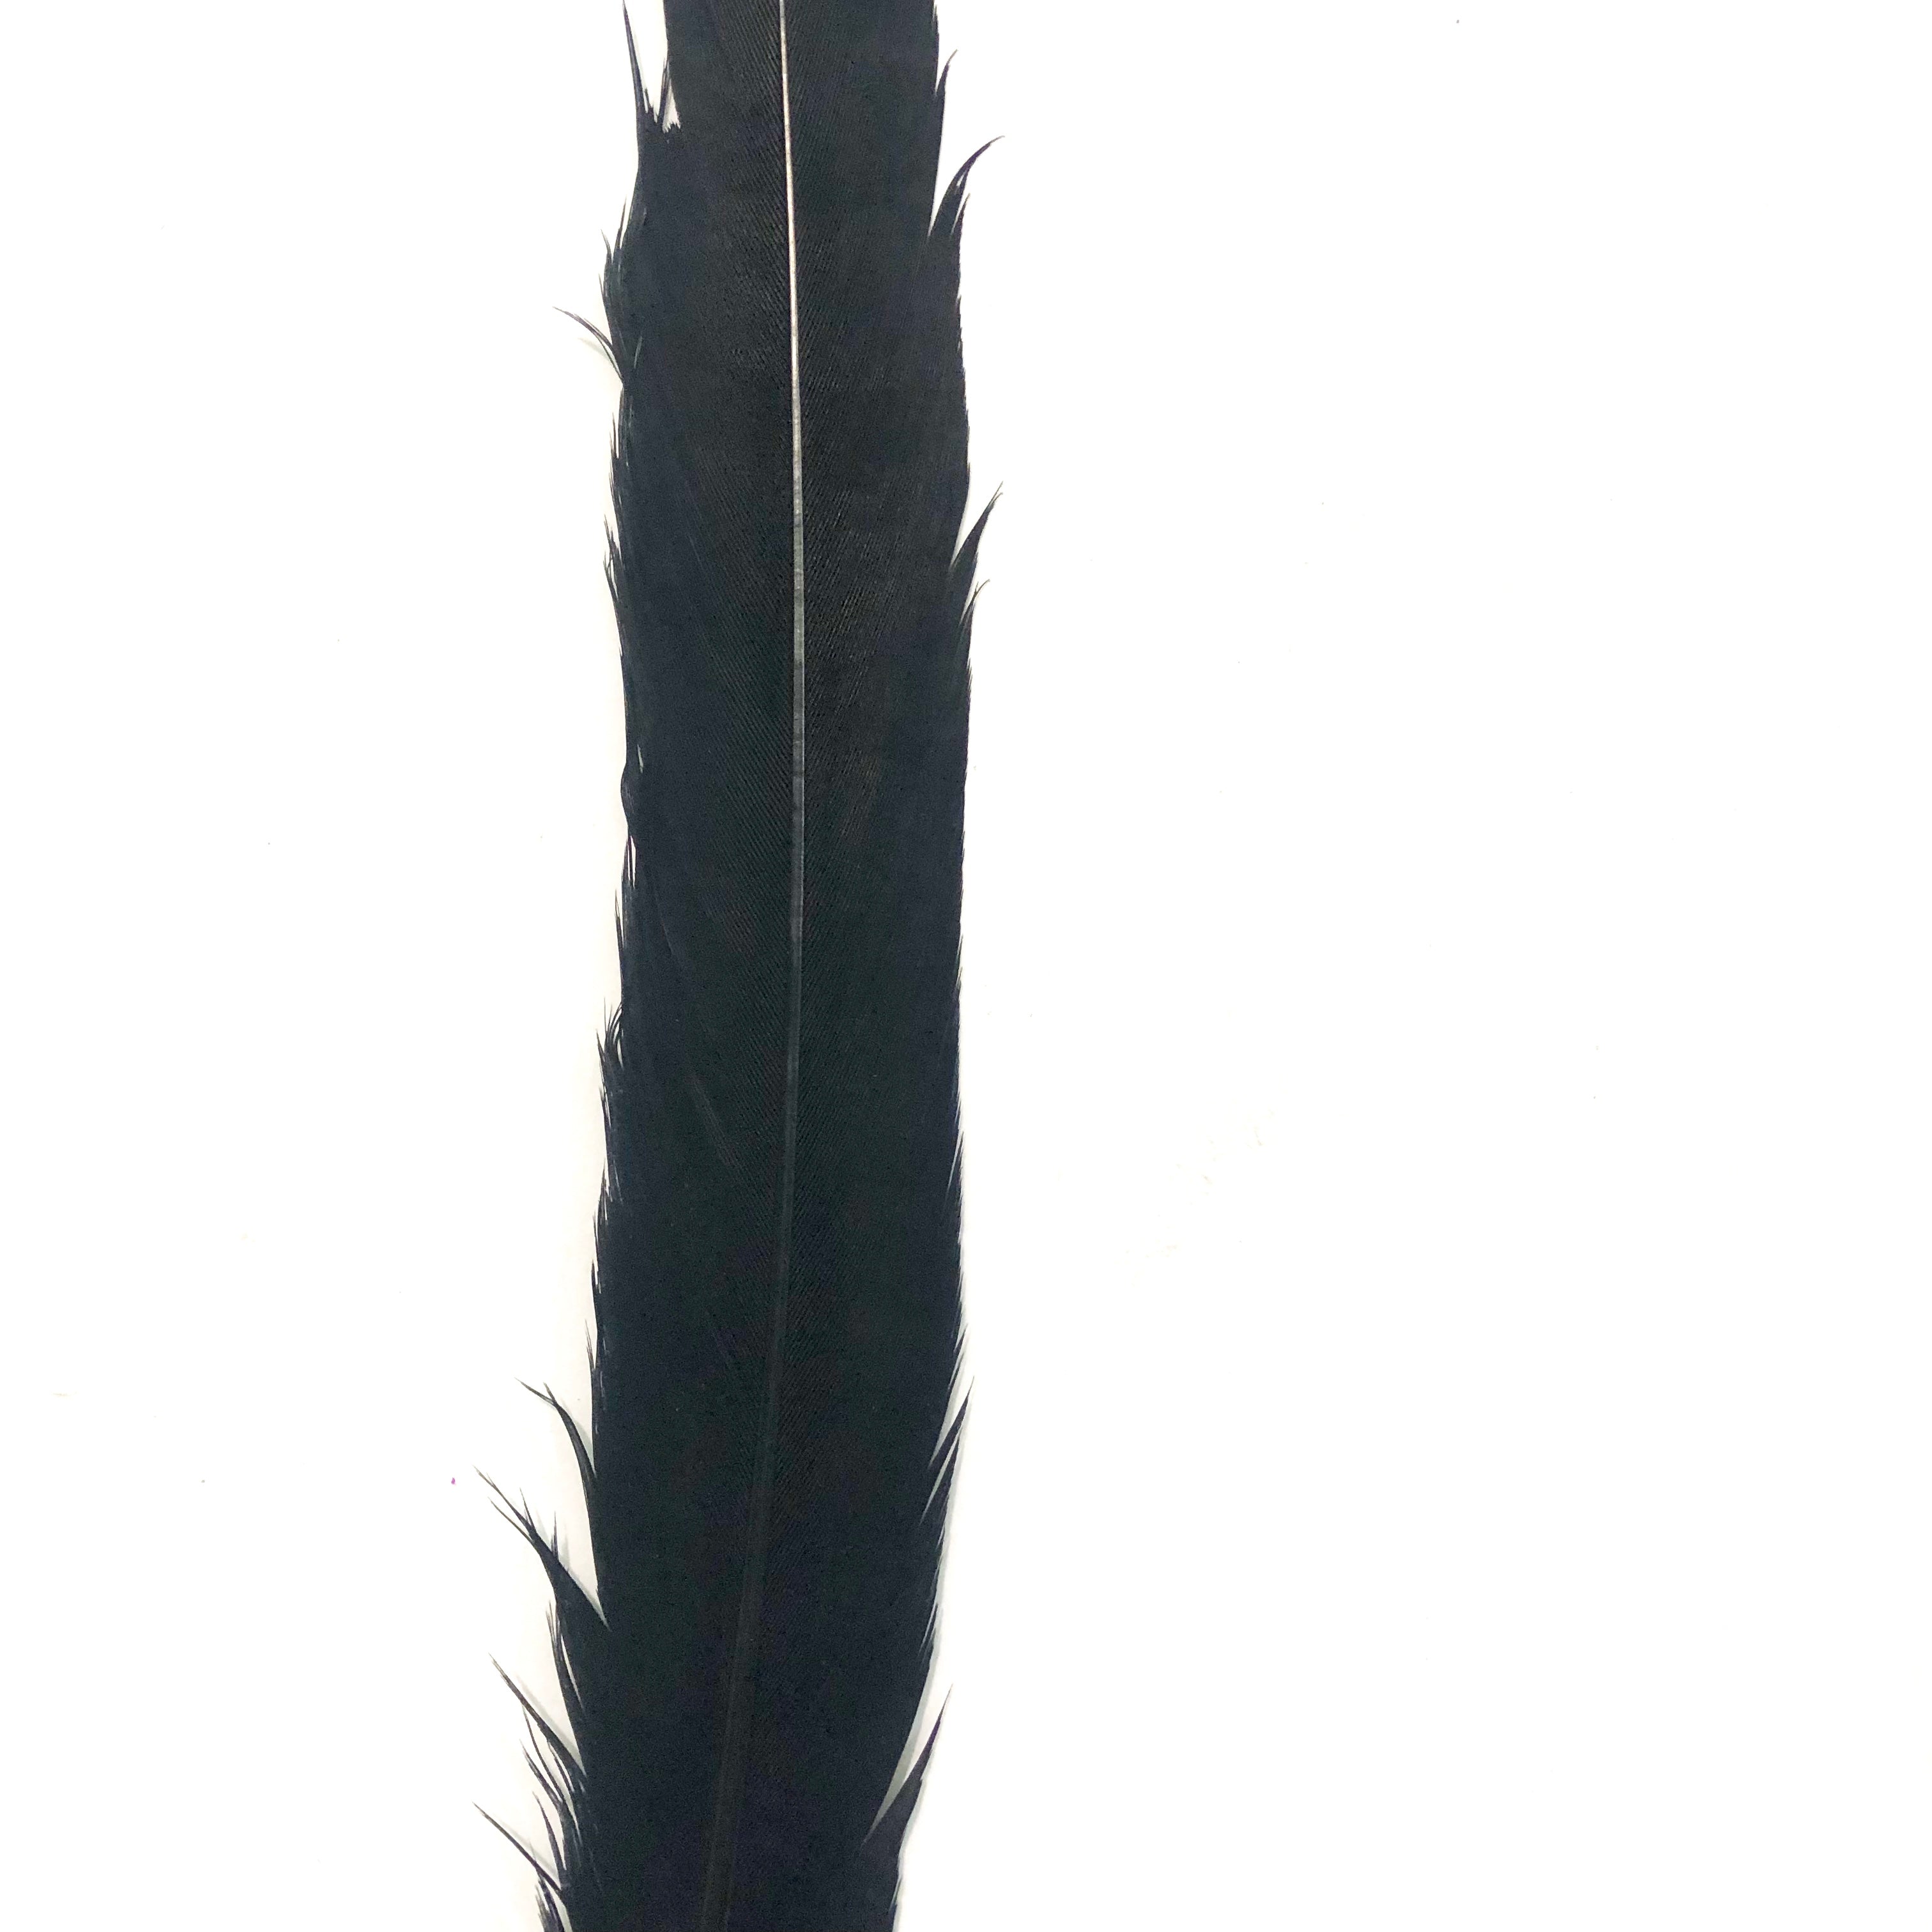 12" to 14" Reeves Pheasant Tail Feather - Black ((SECONDS))